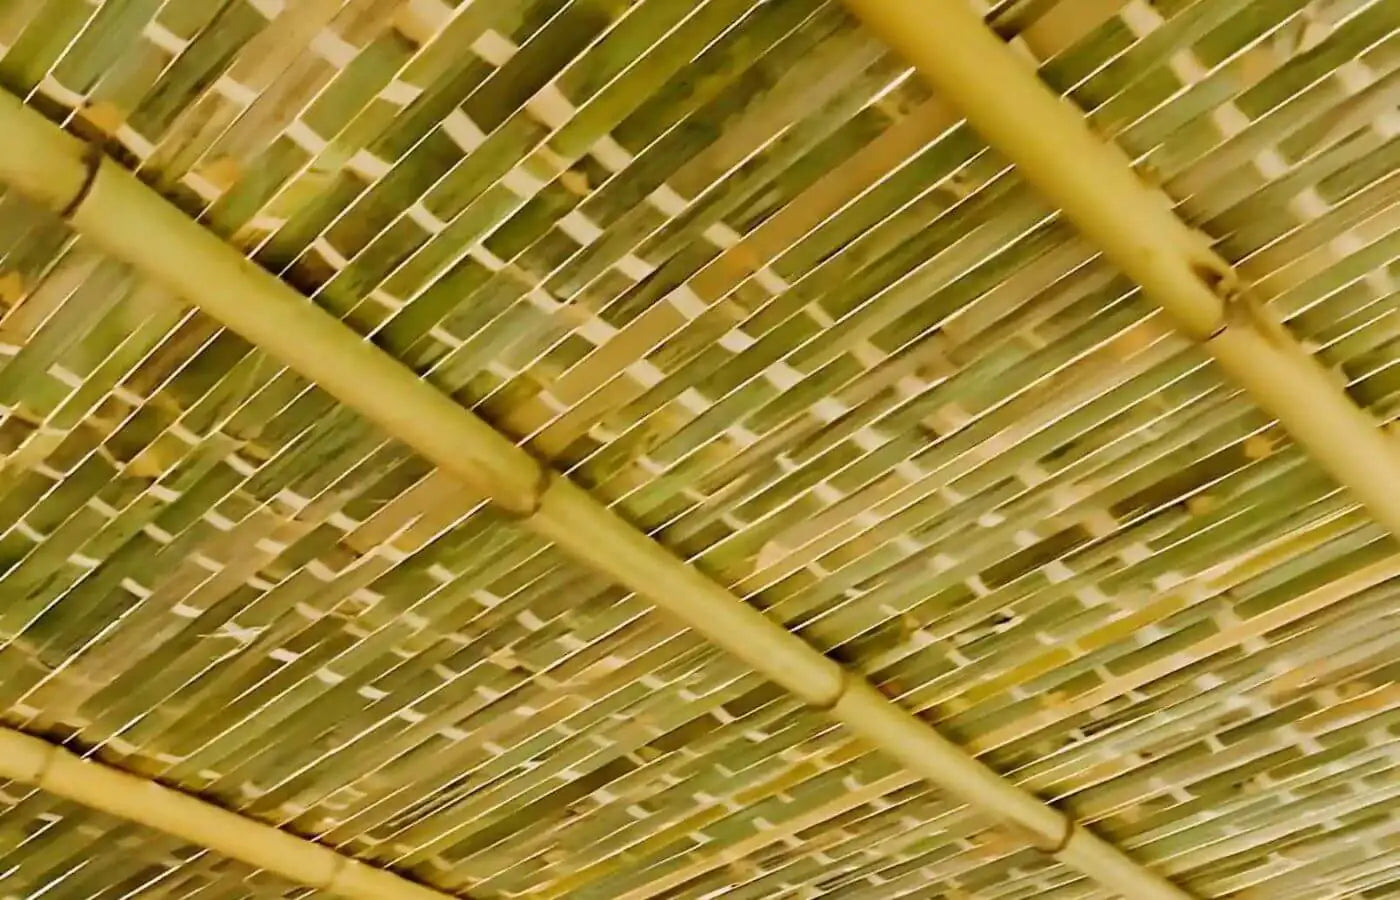 The Top Choice: Bamboo Schach Mats vs. Palm Branches for Your Sukkah Roof